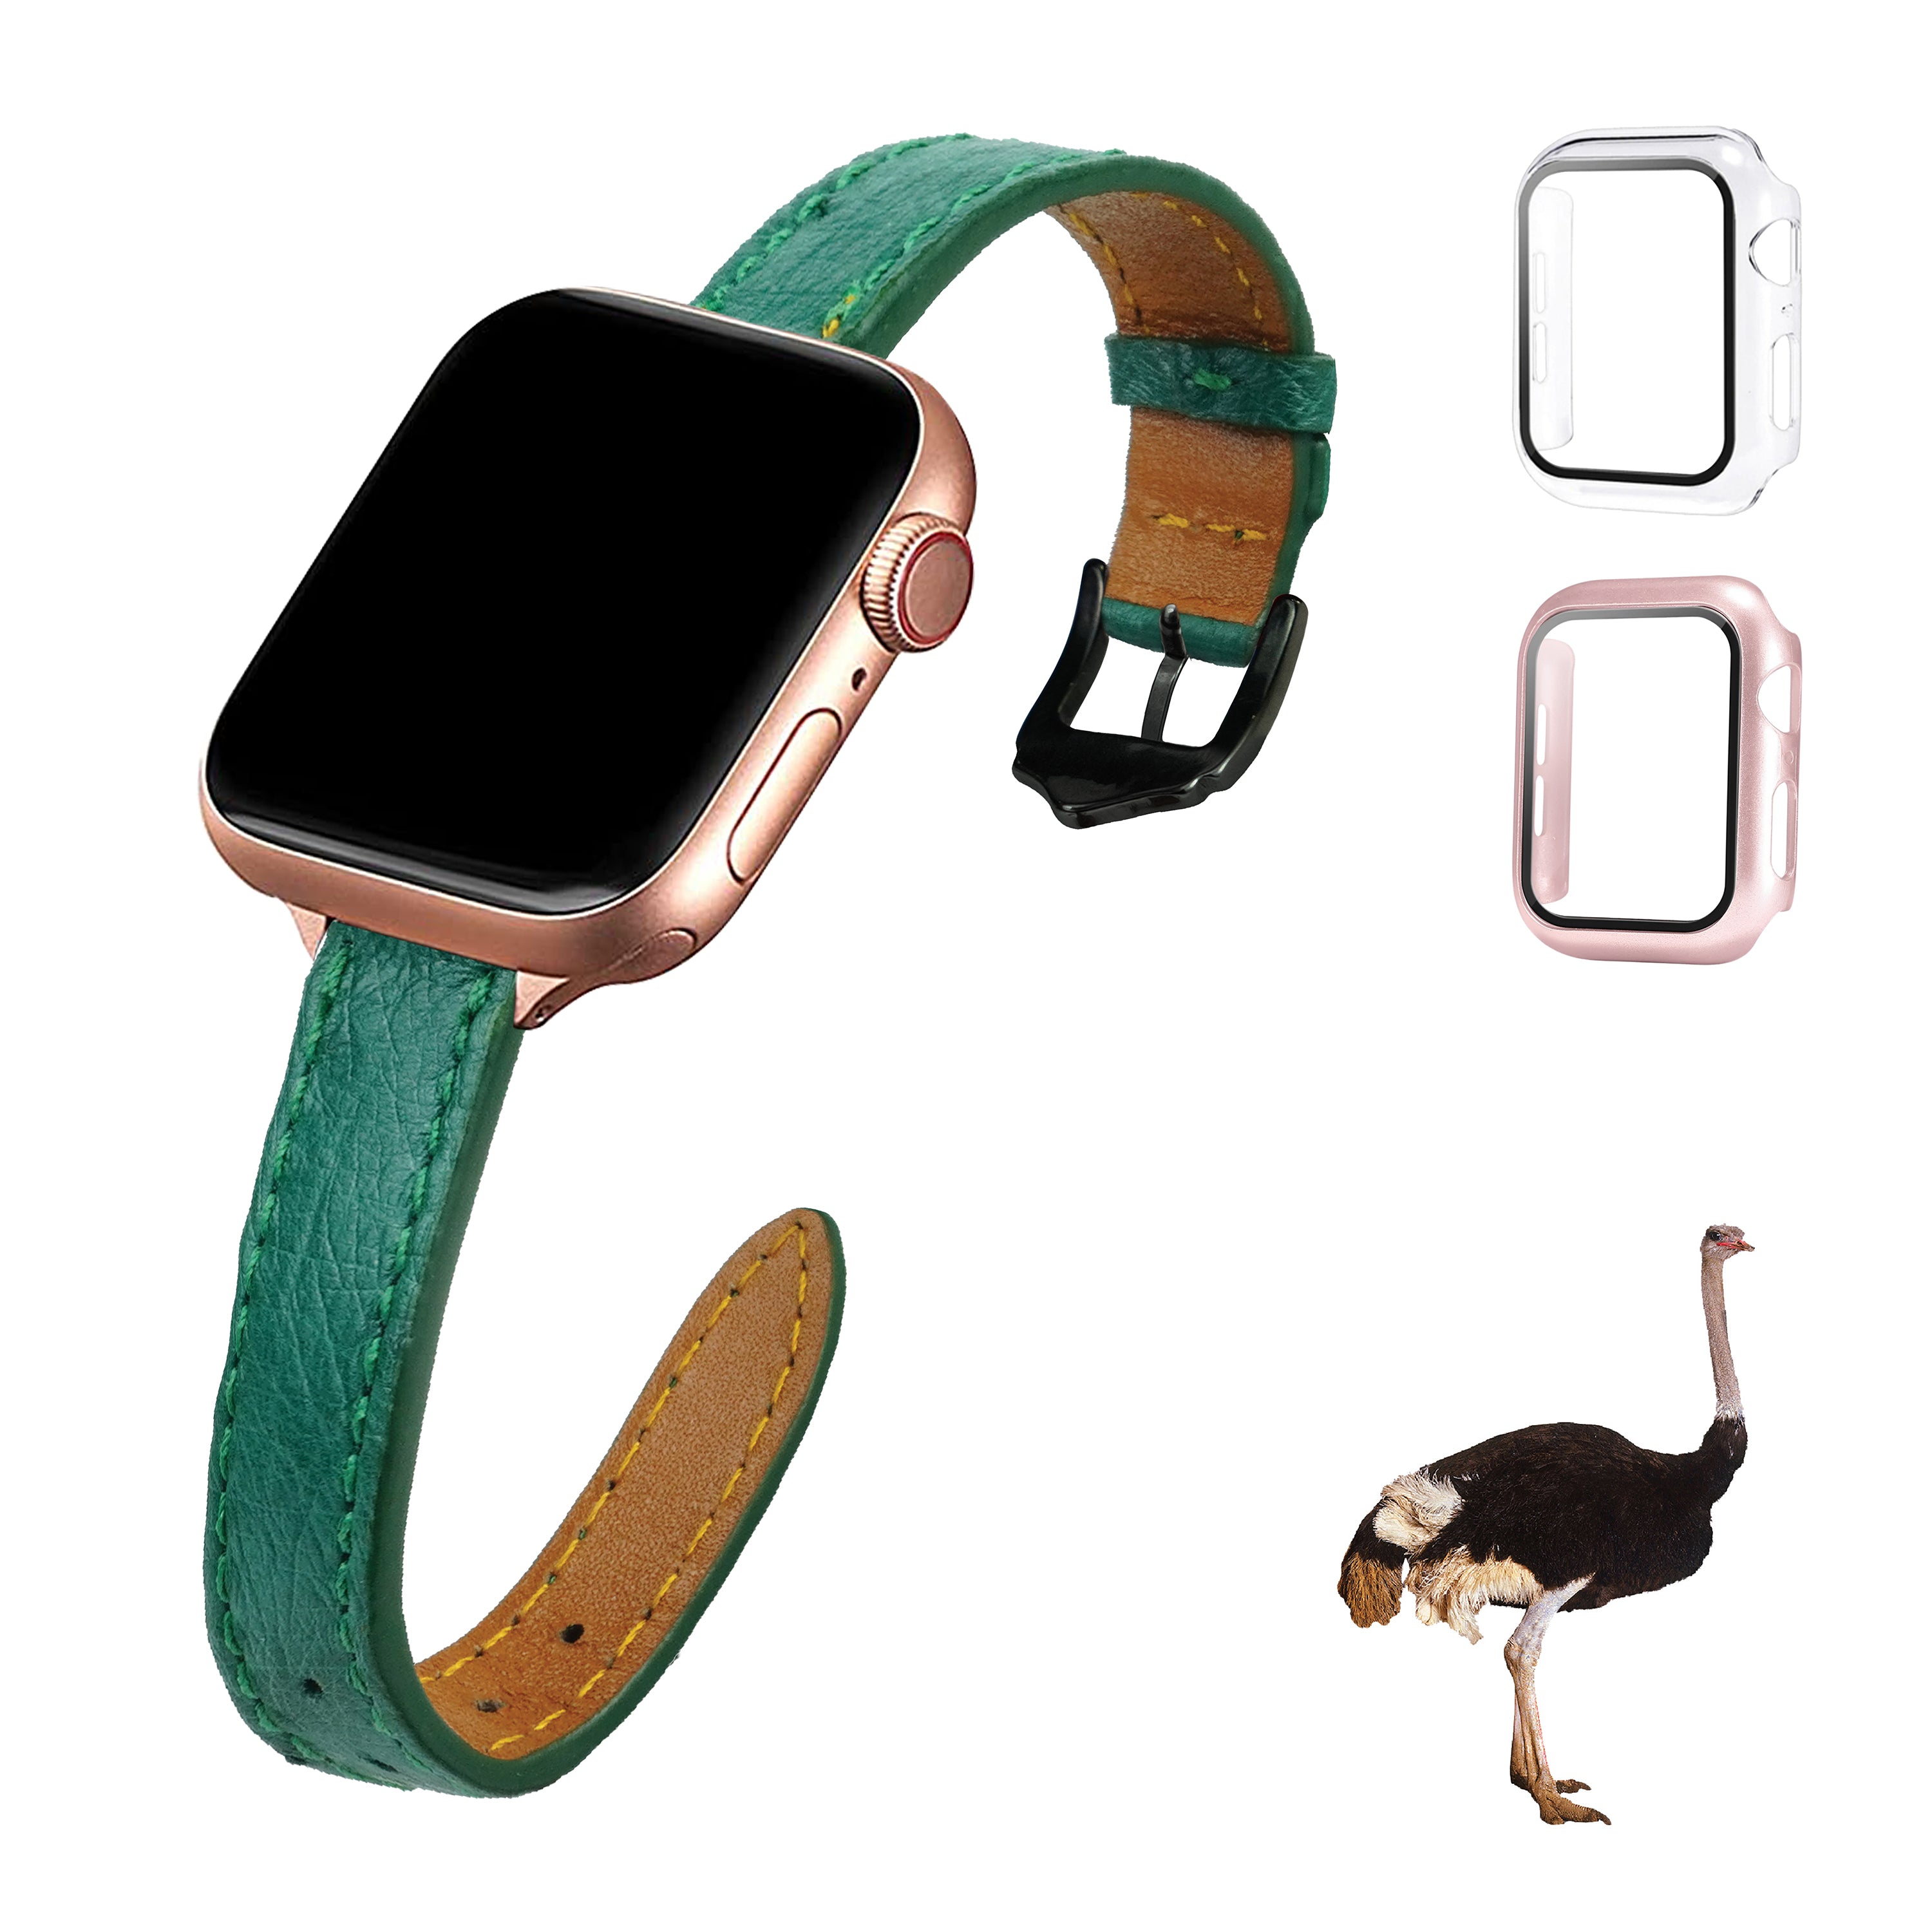 Green Flat Ostrich Leather Band Compatible Apple Watch Iwatch 38mm Screen Protector Case Black Adapter Replacement Strap For Smartwatch Series 1 2 3 Leather Handmade AW-188B-W-38MM